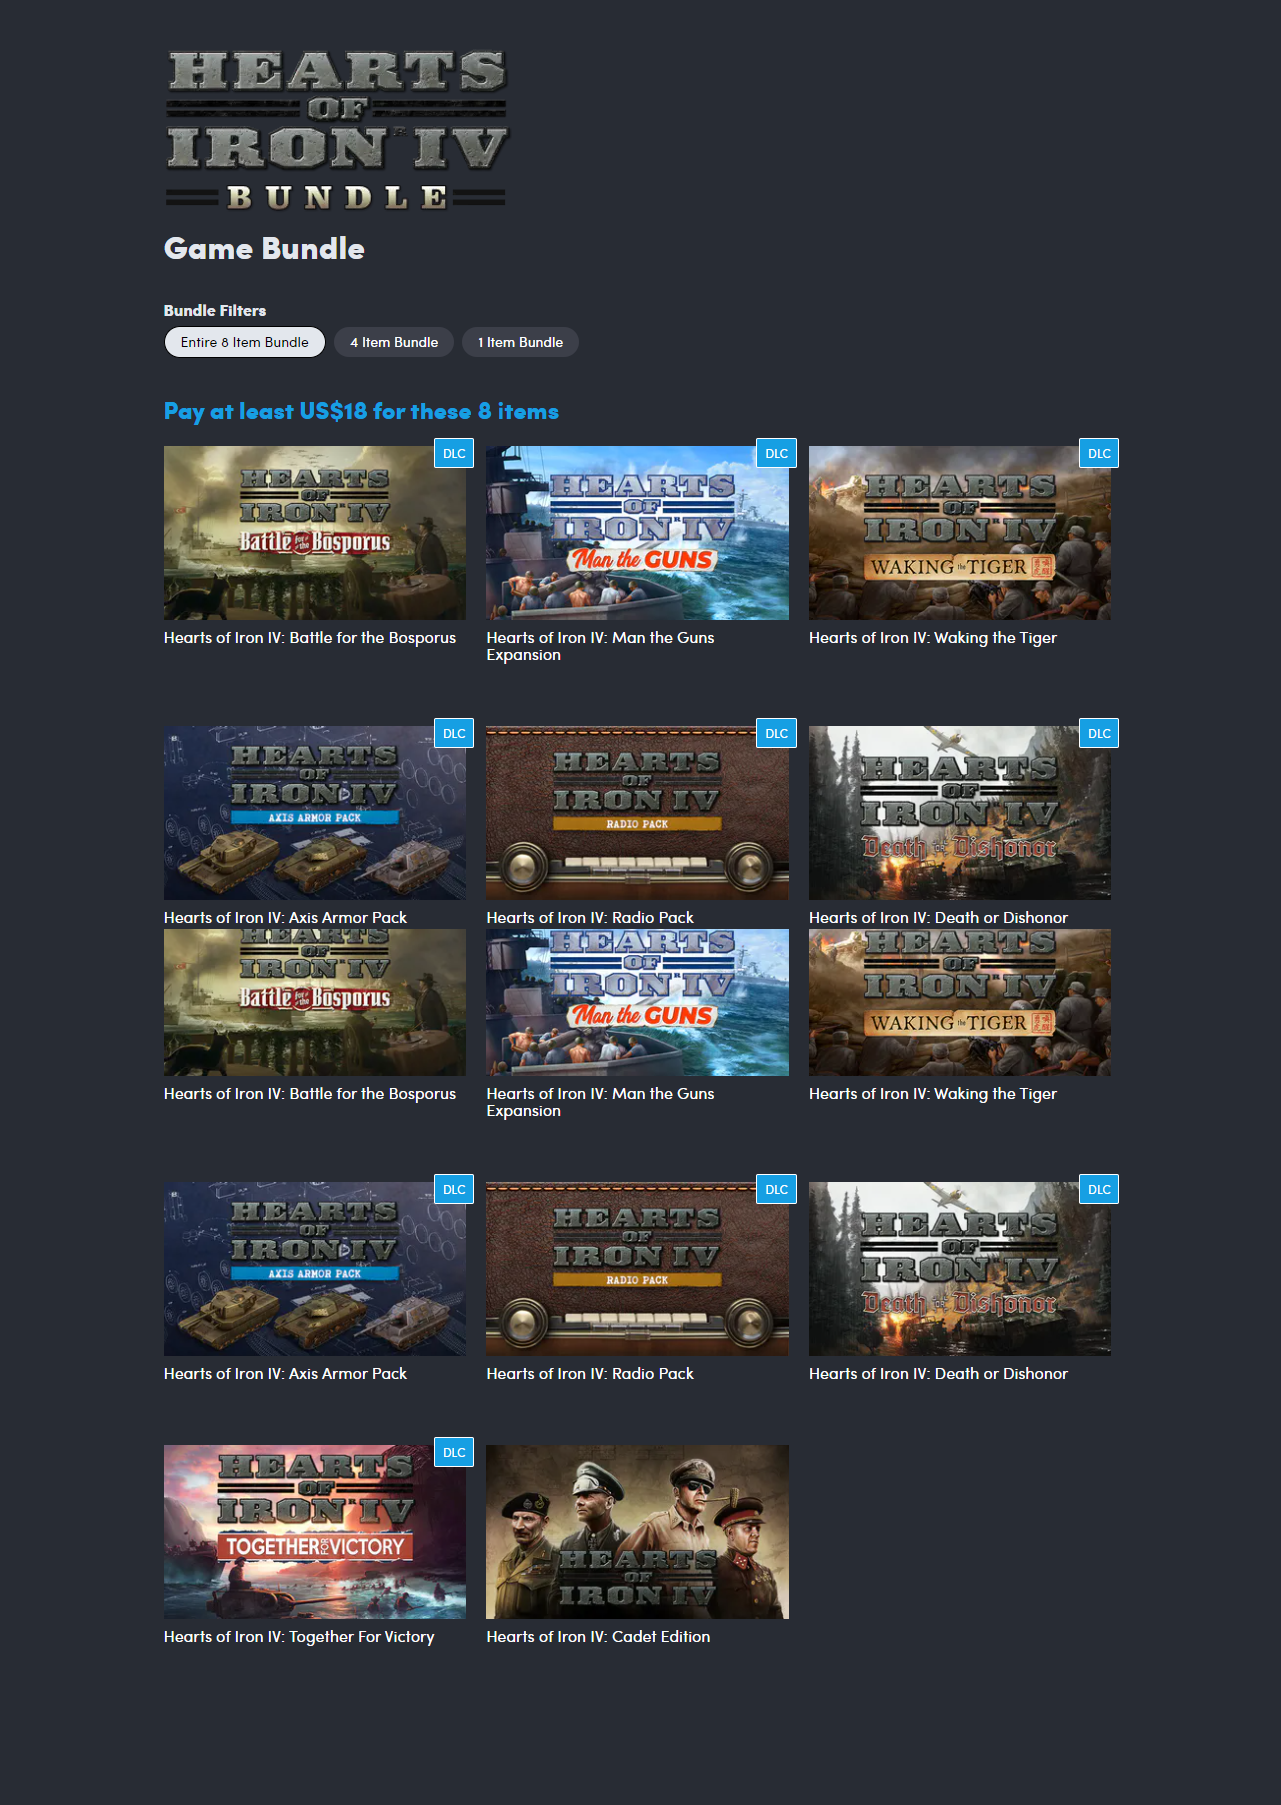 FireShot Capture 002 - Humble Hearts of Iron Bundle (pay what you want and help charity)_ - www.humblebundle.com.png